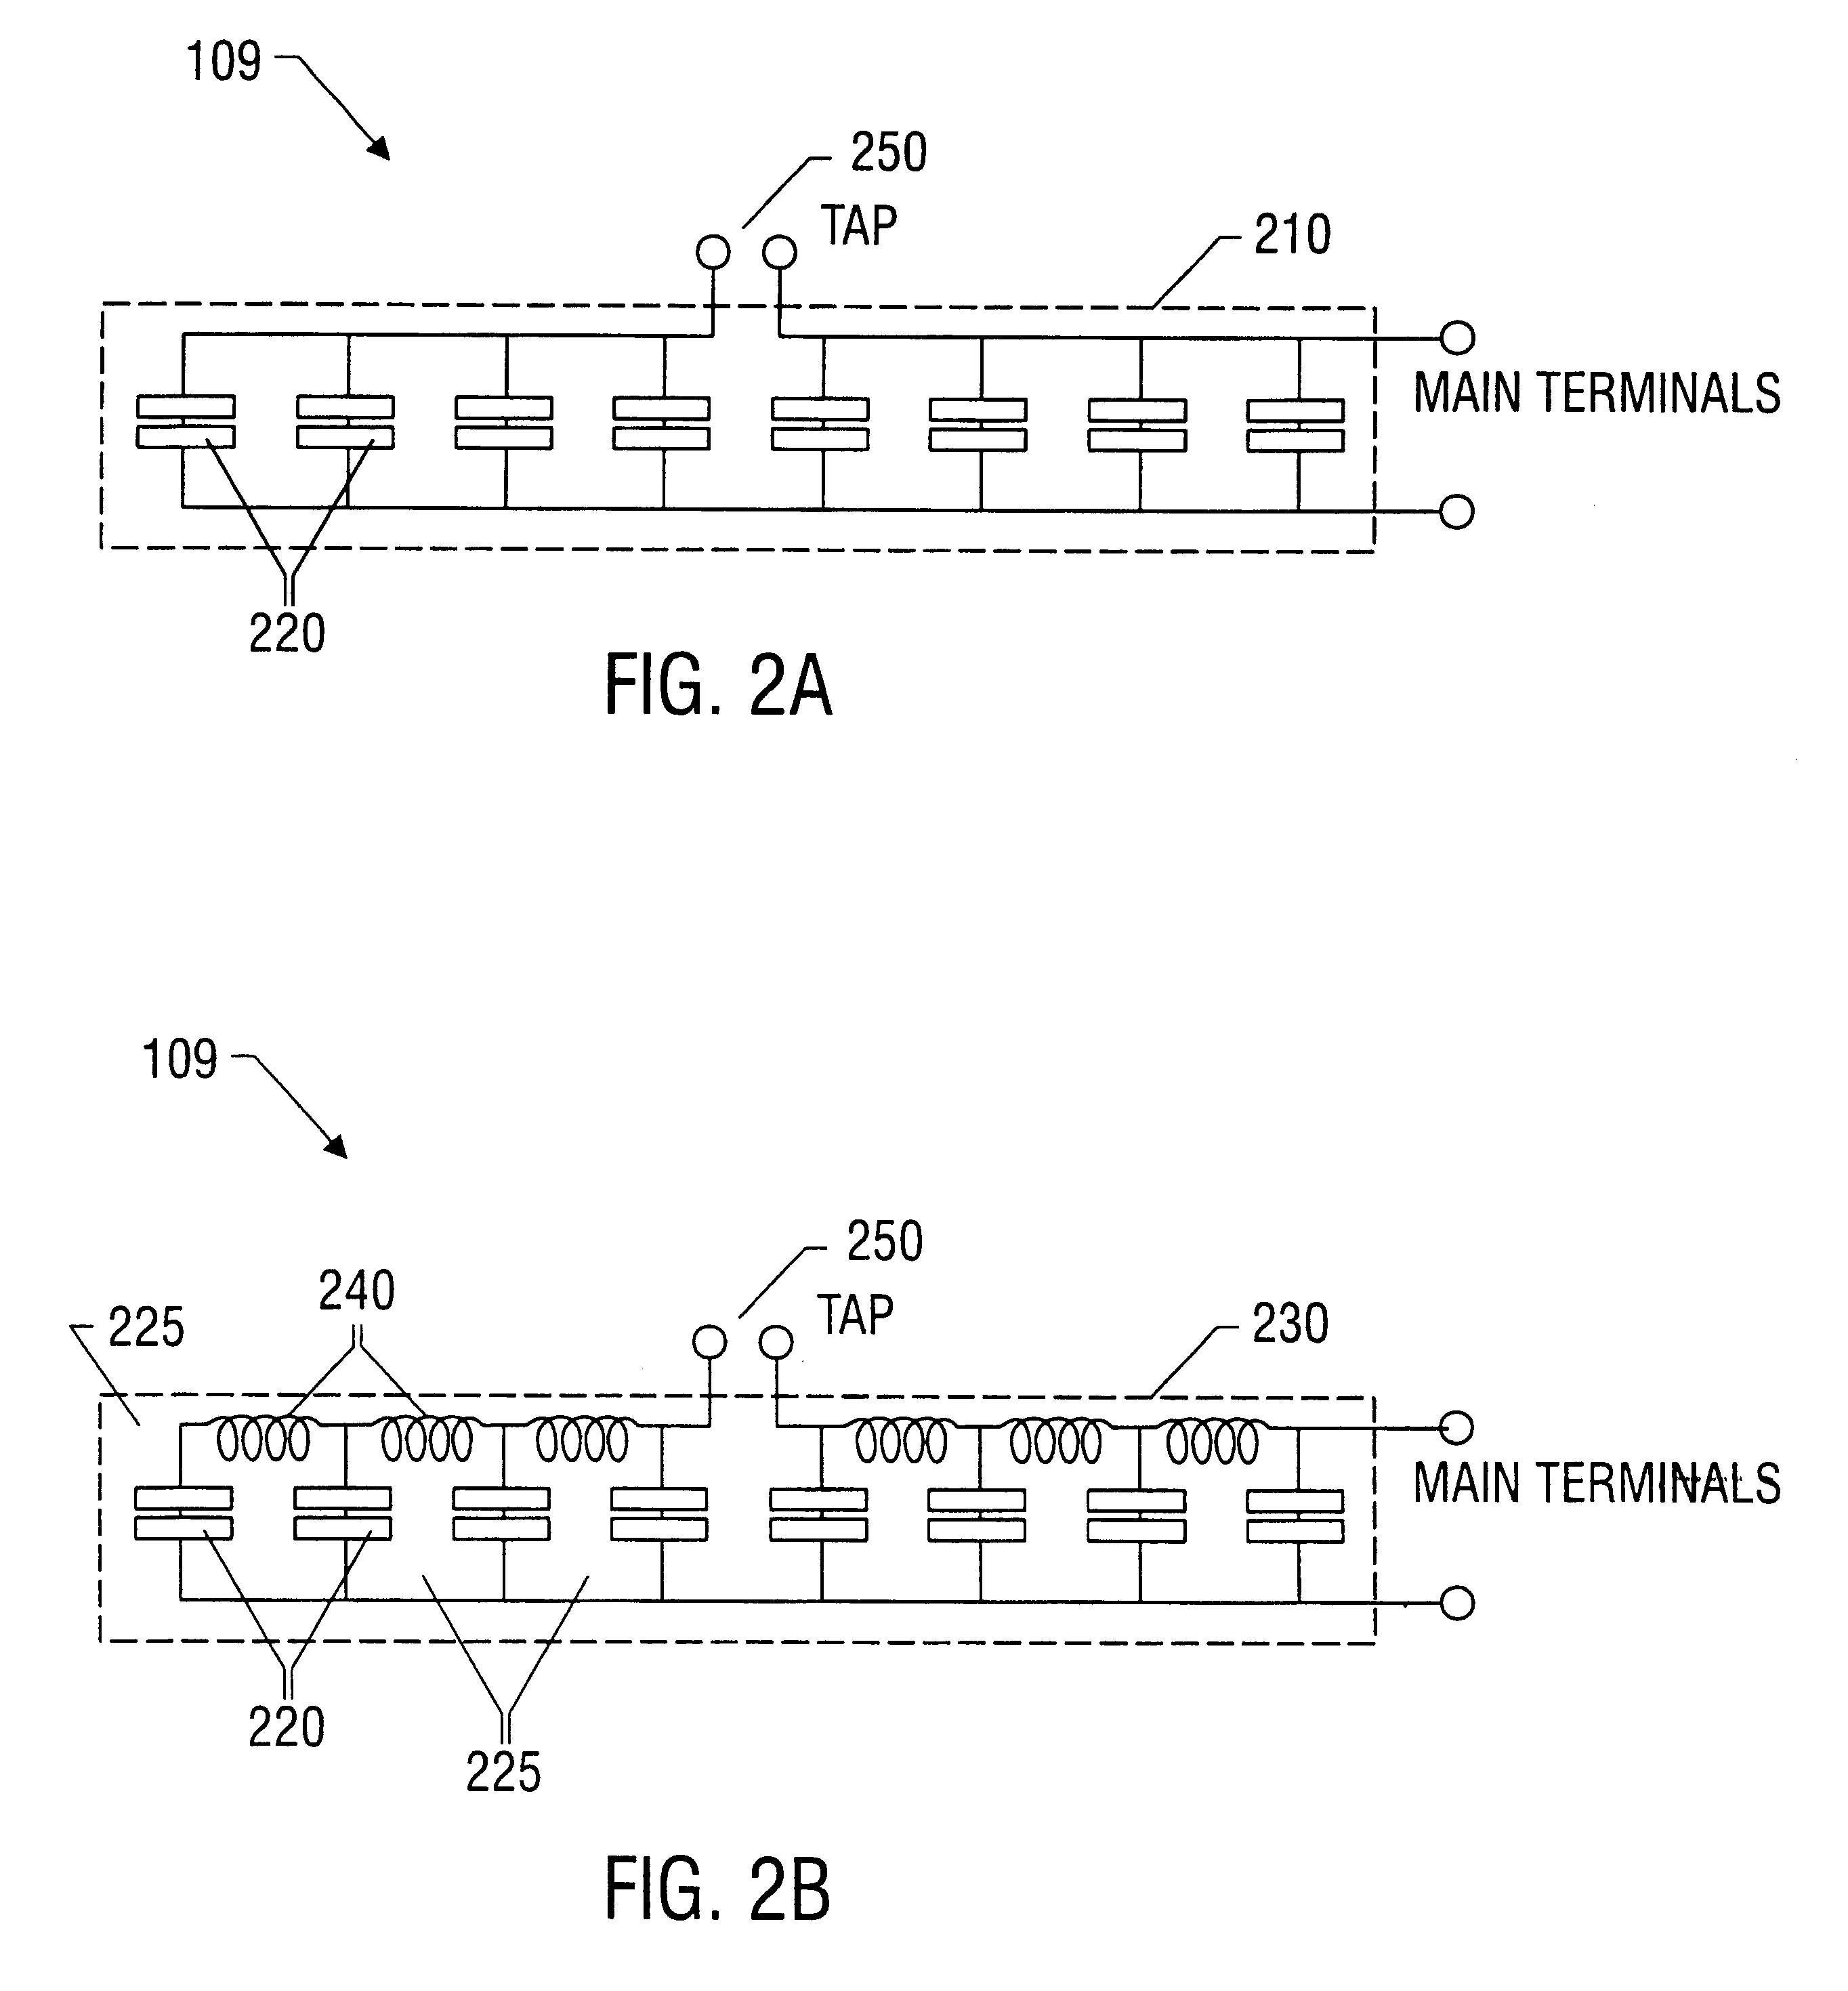 Method and apparatus for transmitting electromagnetic waves and analyzing returns to locate underground fluid deposits